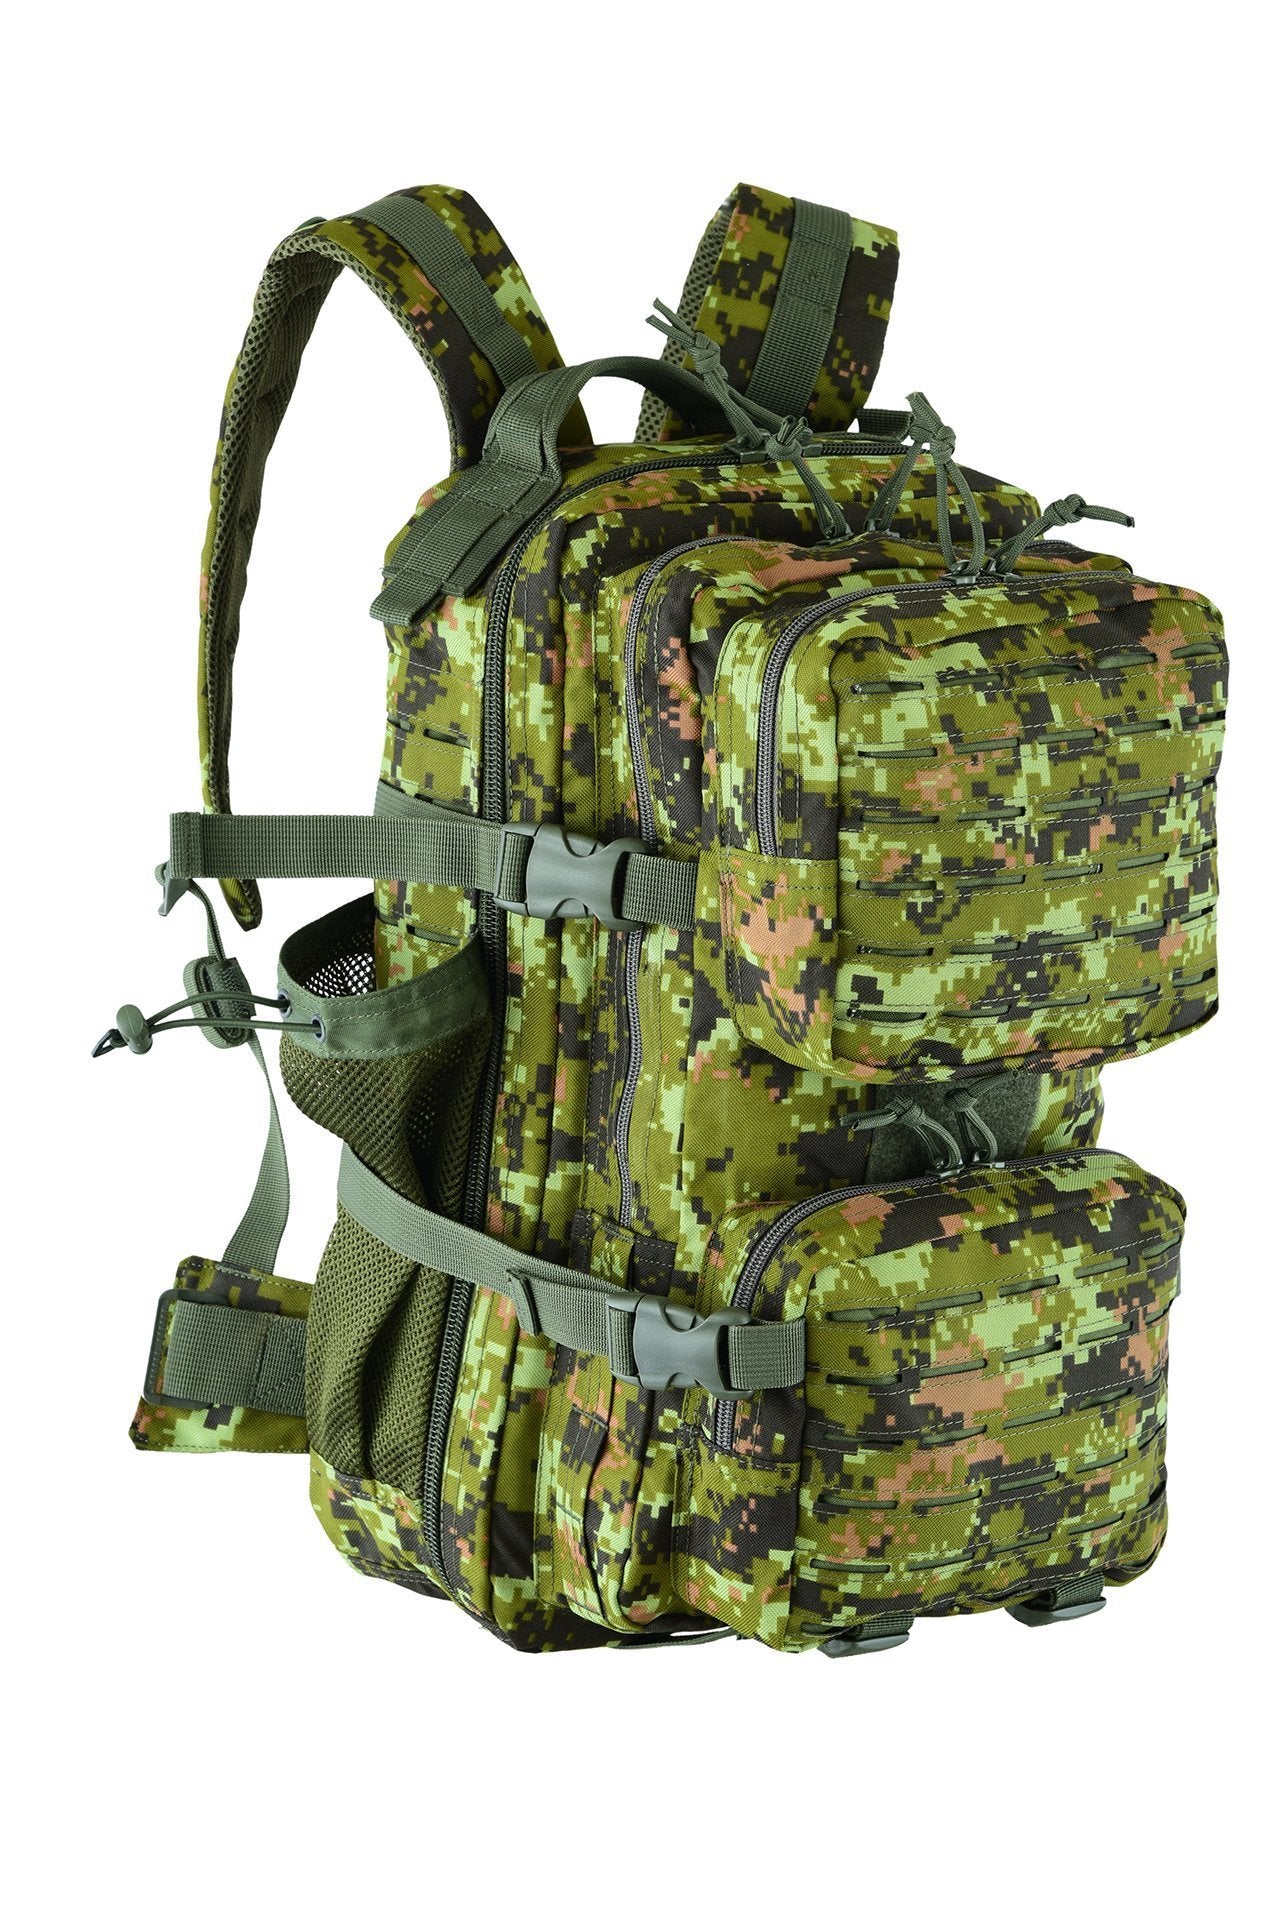 SHS-452 The Recon Pack